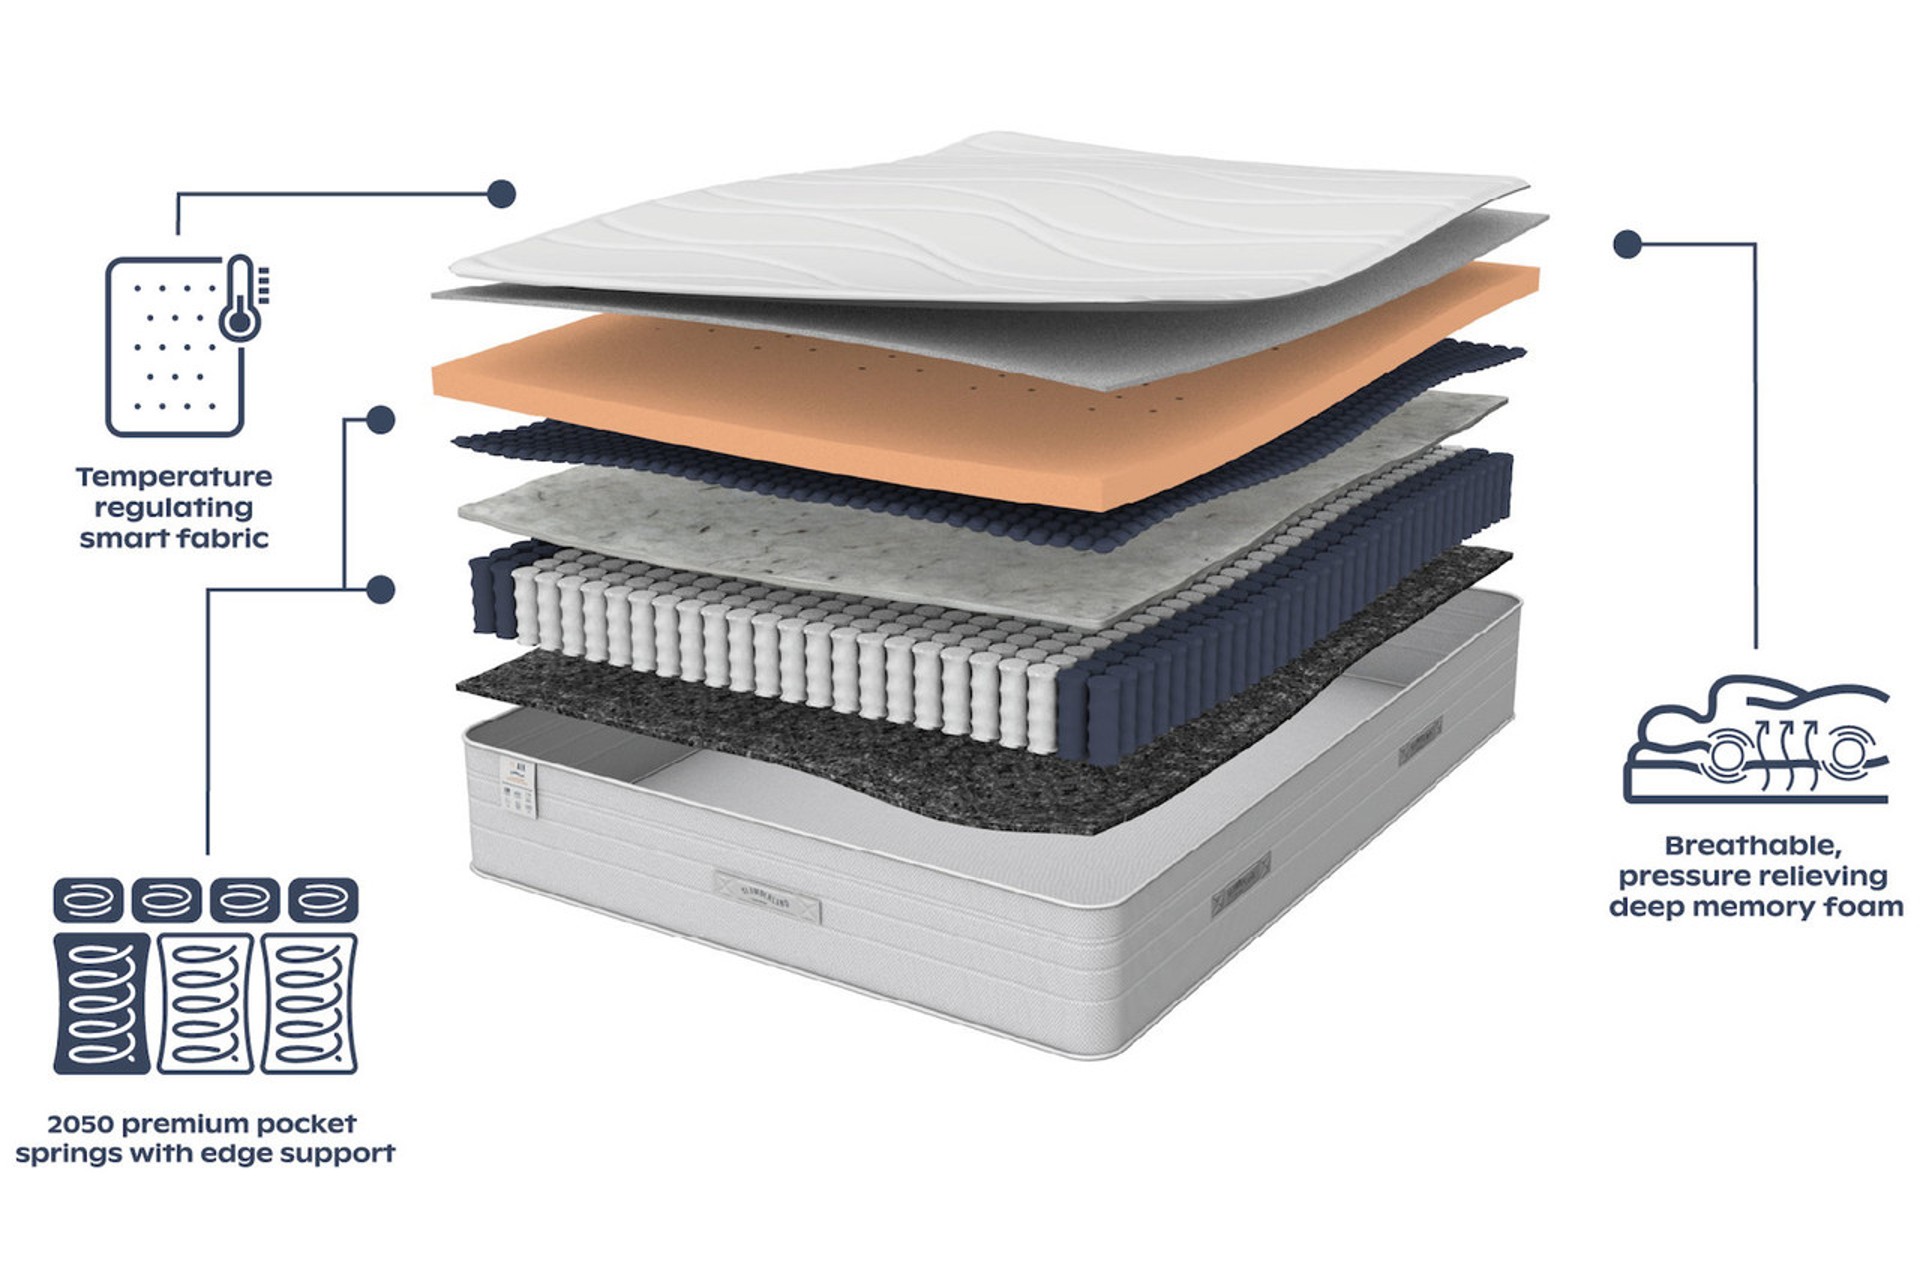 Slumberland Air Memory Foam Mattress infographic demonstrating the multiple mattress layers and their functionality